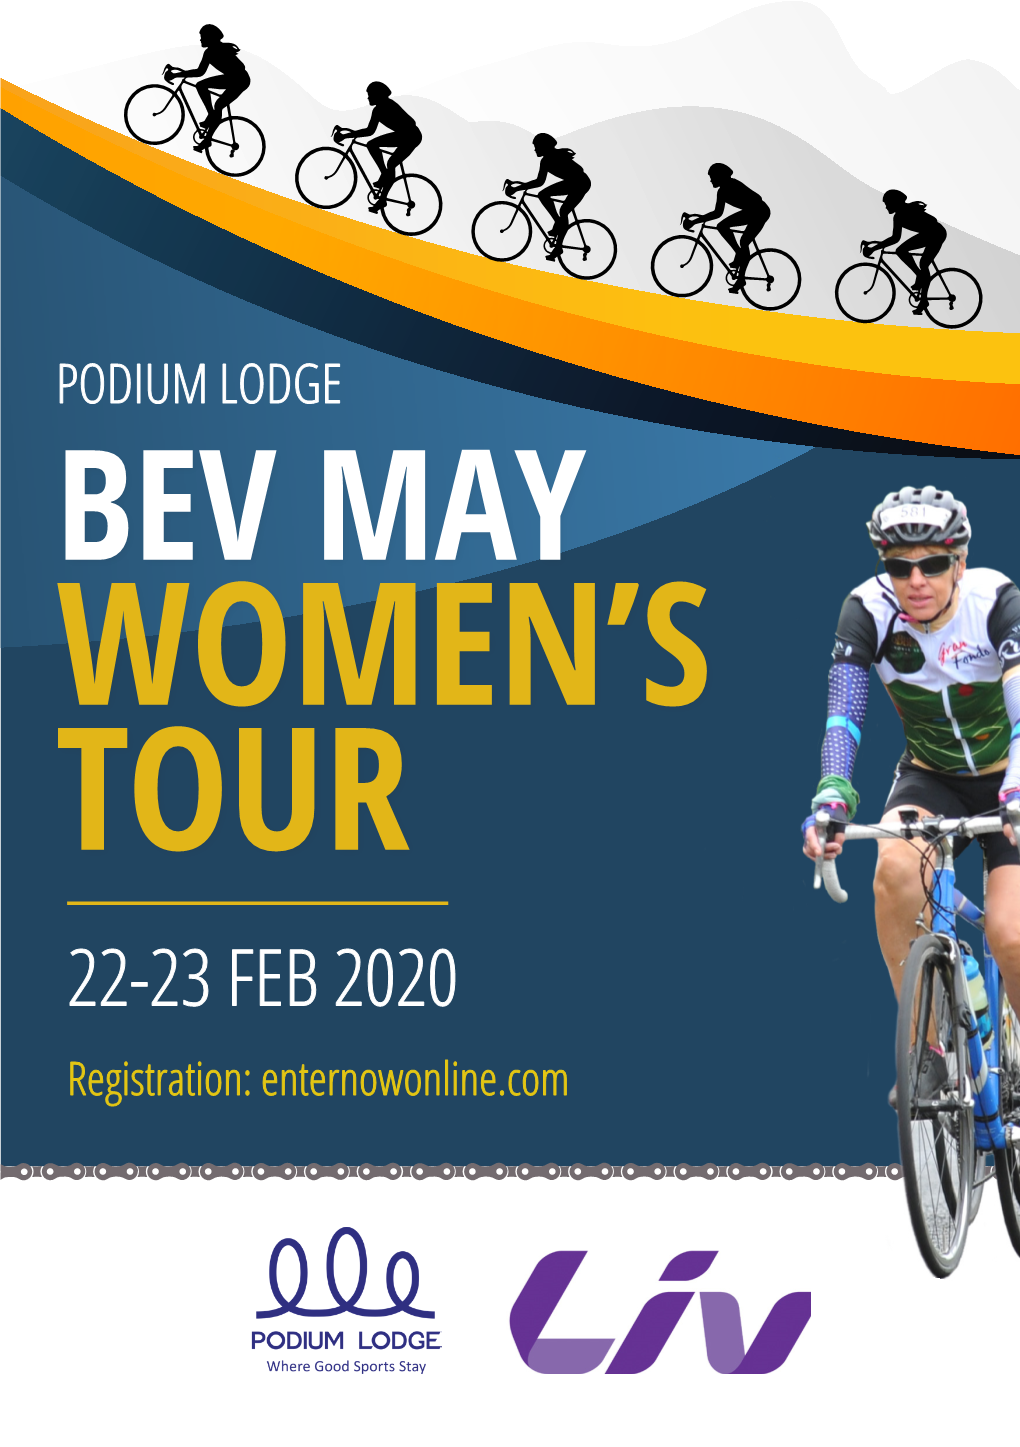 BEV MAY WOMEN’S TOUR What’S Inside